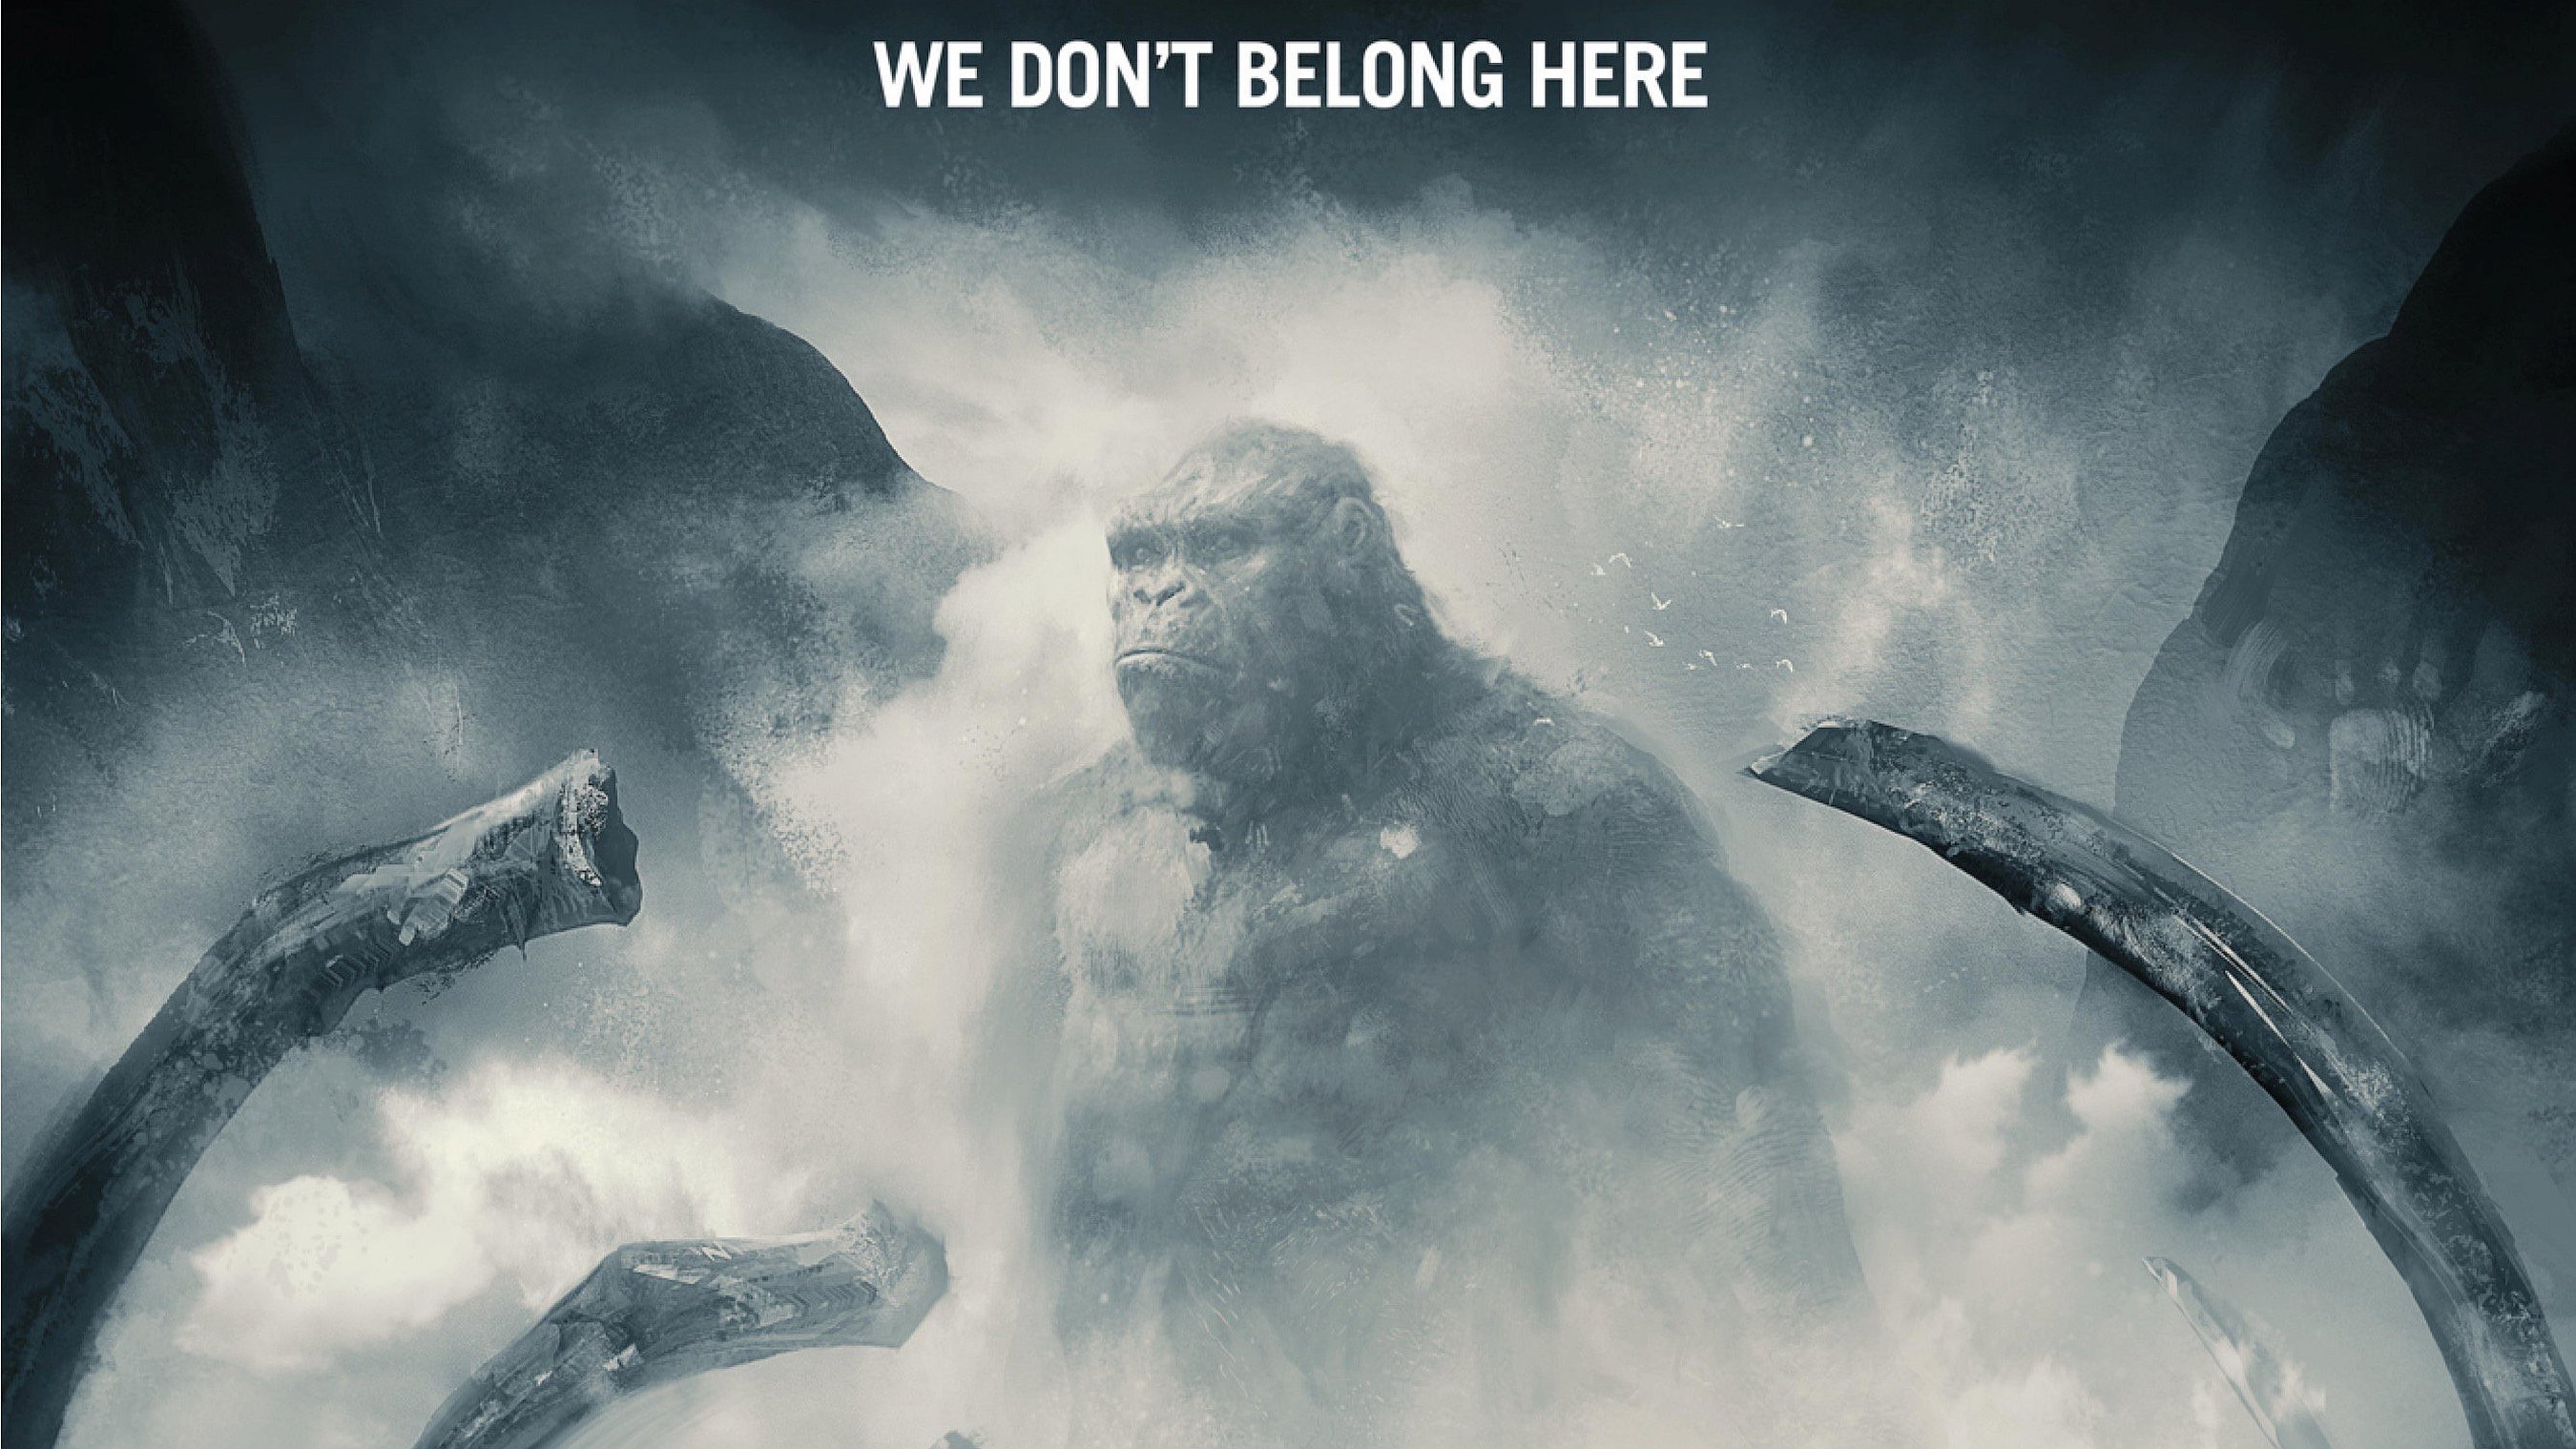 Kong: Skull Island Picture